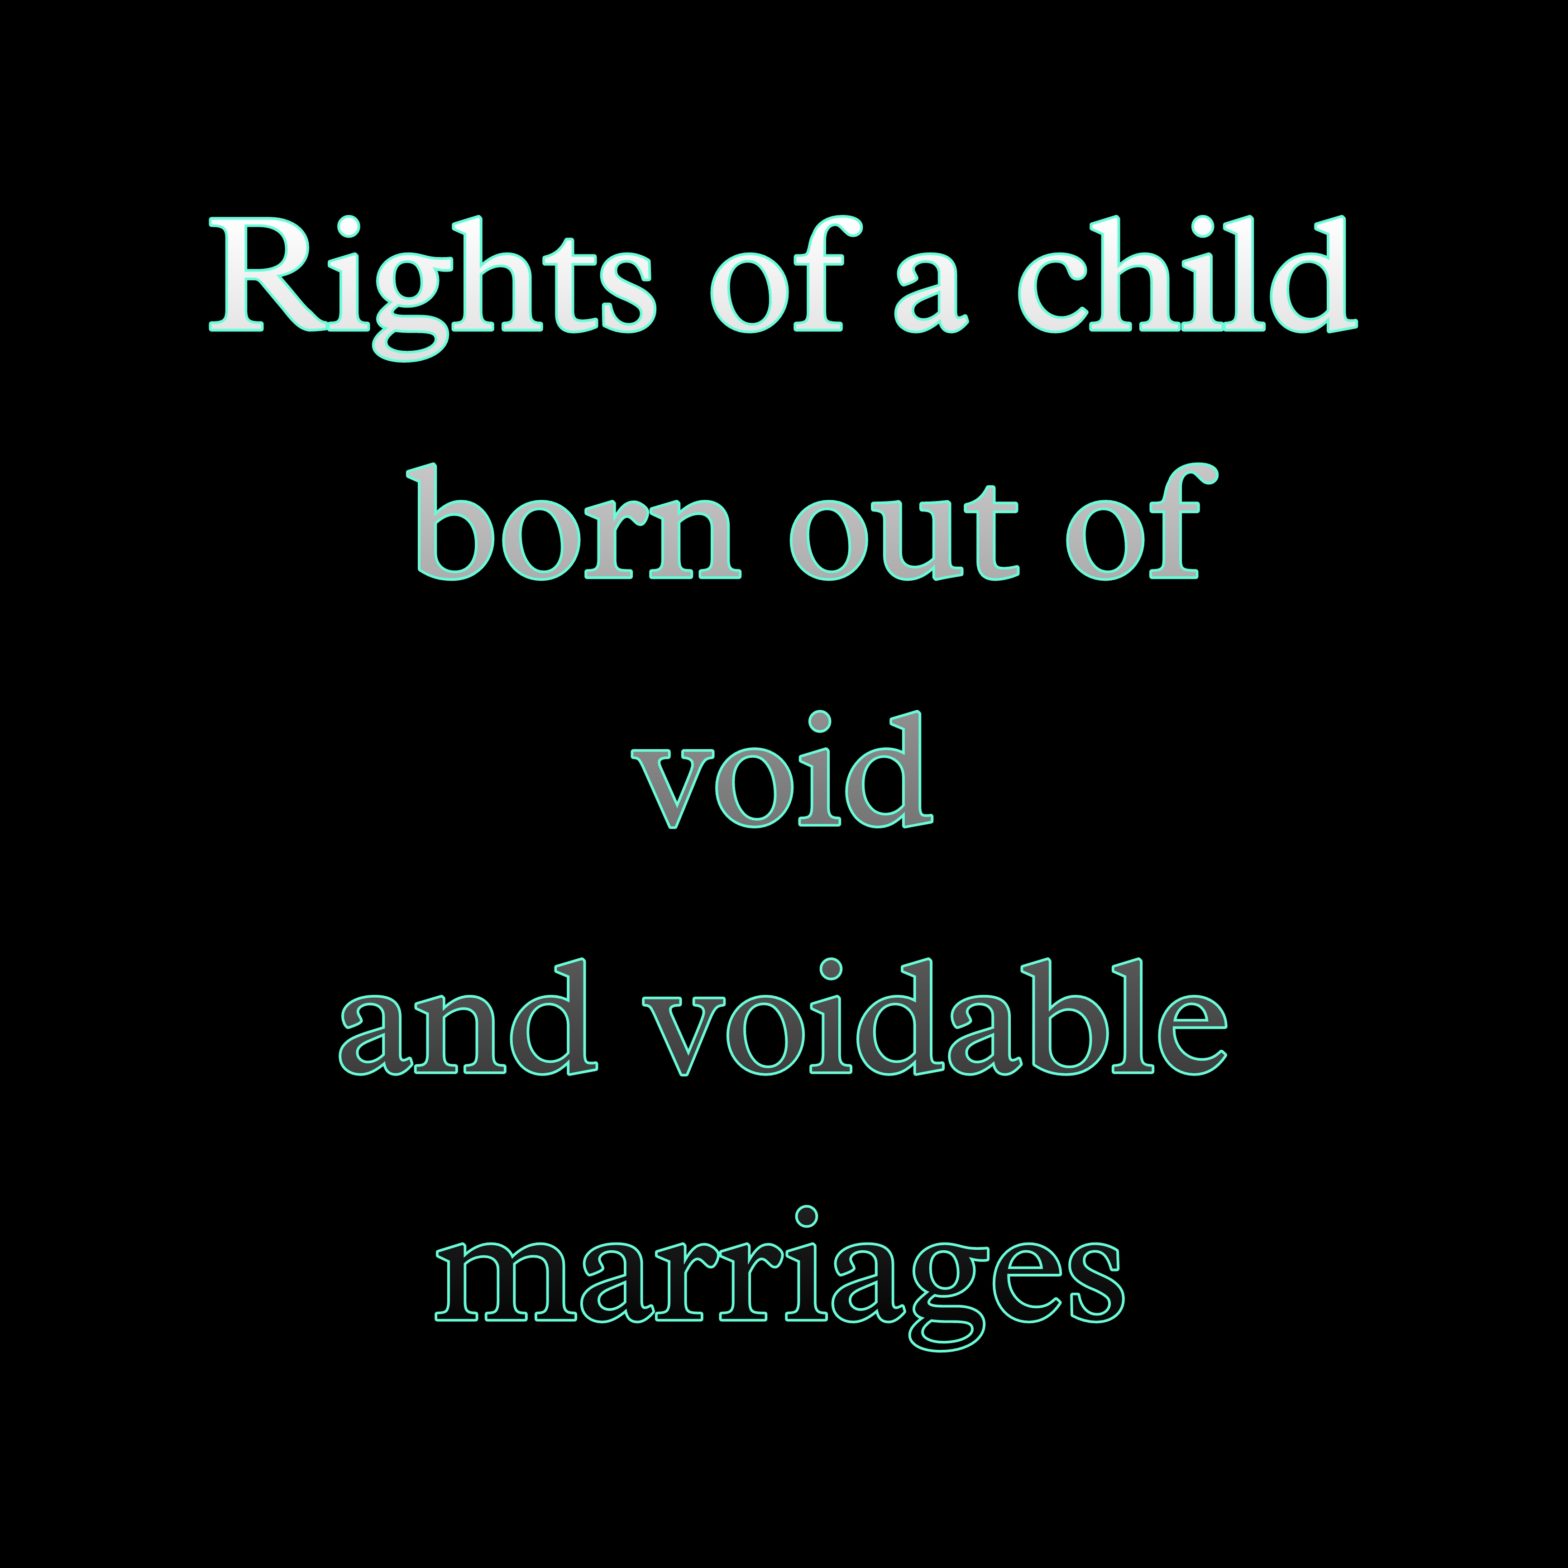 Rights of a child born out of void and voidable marriages.